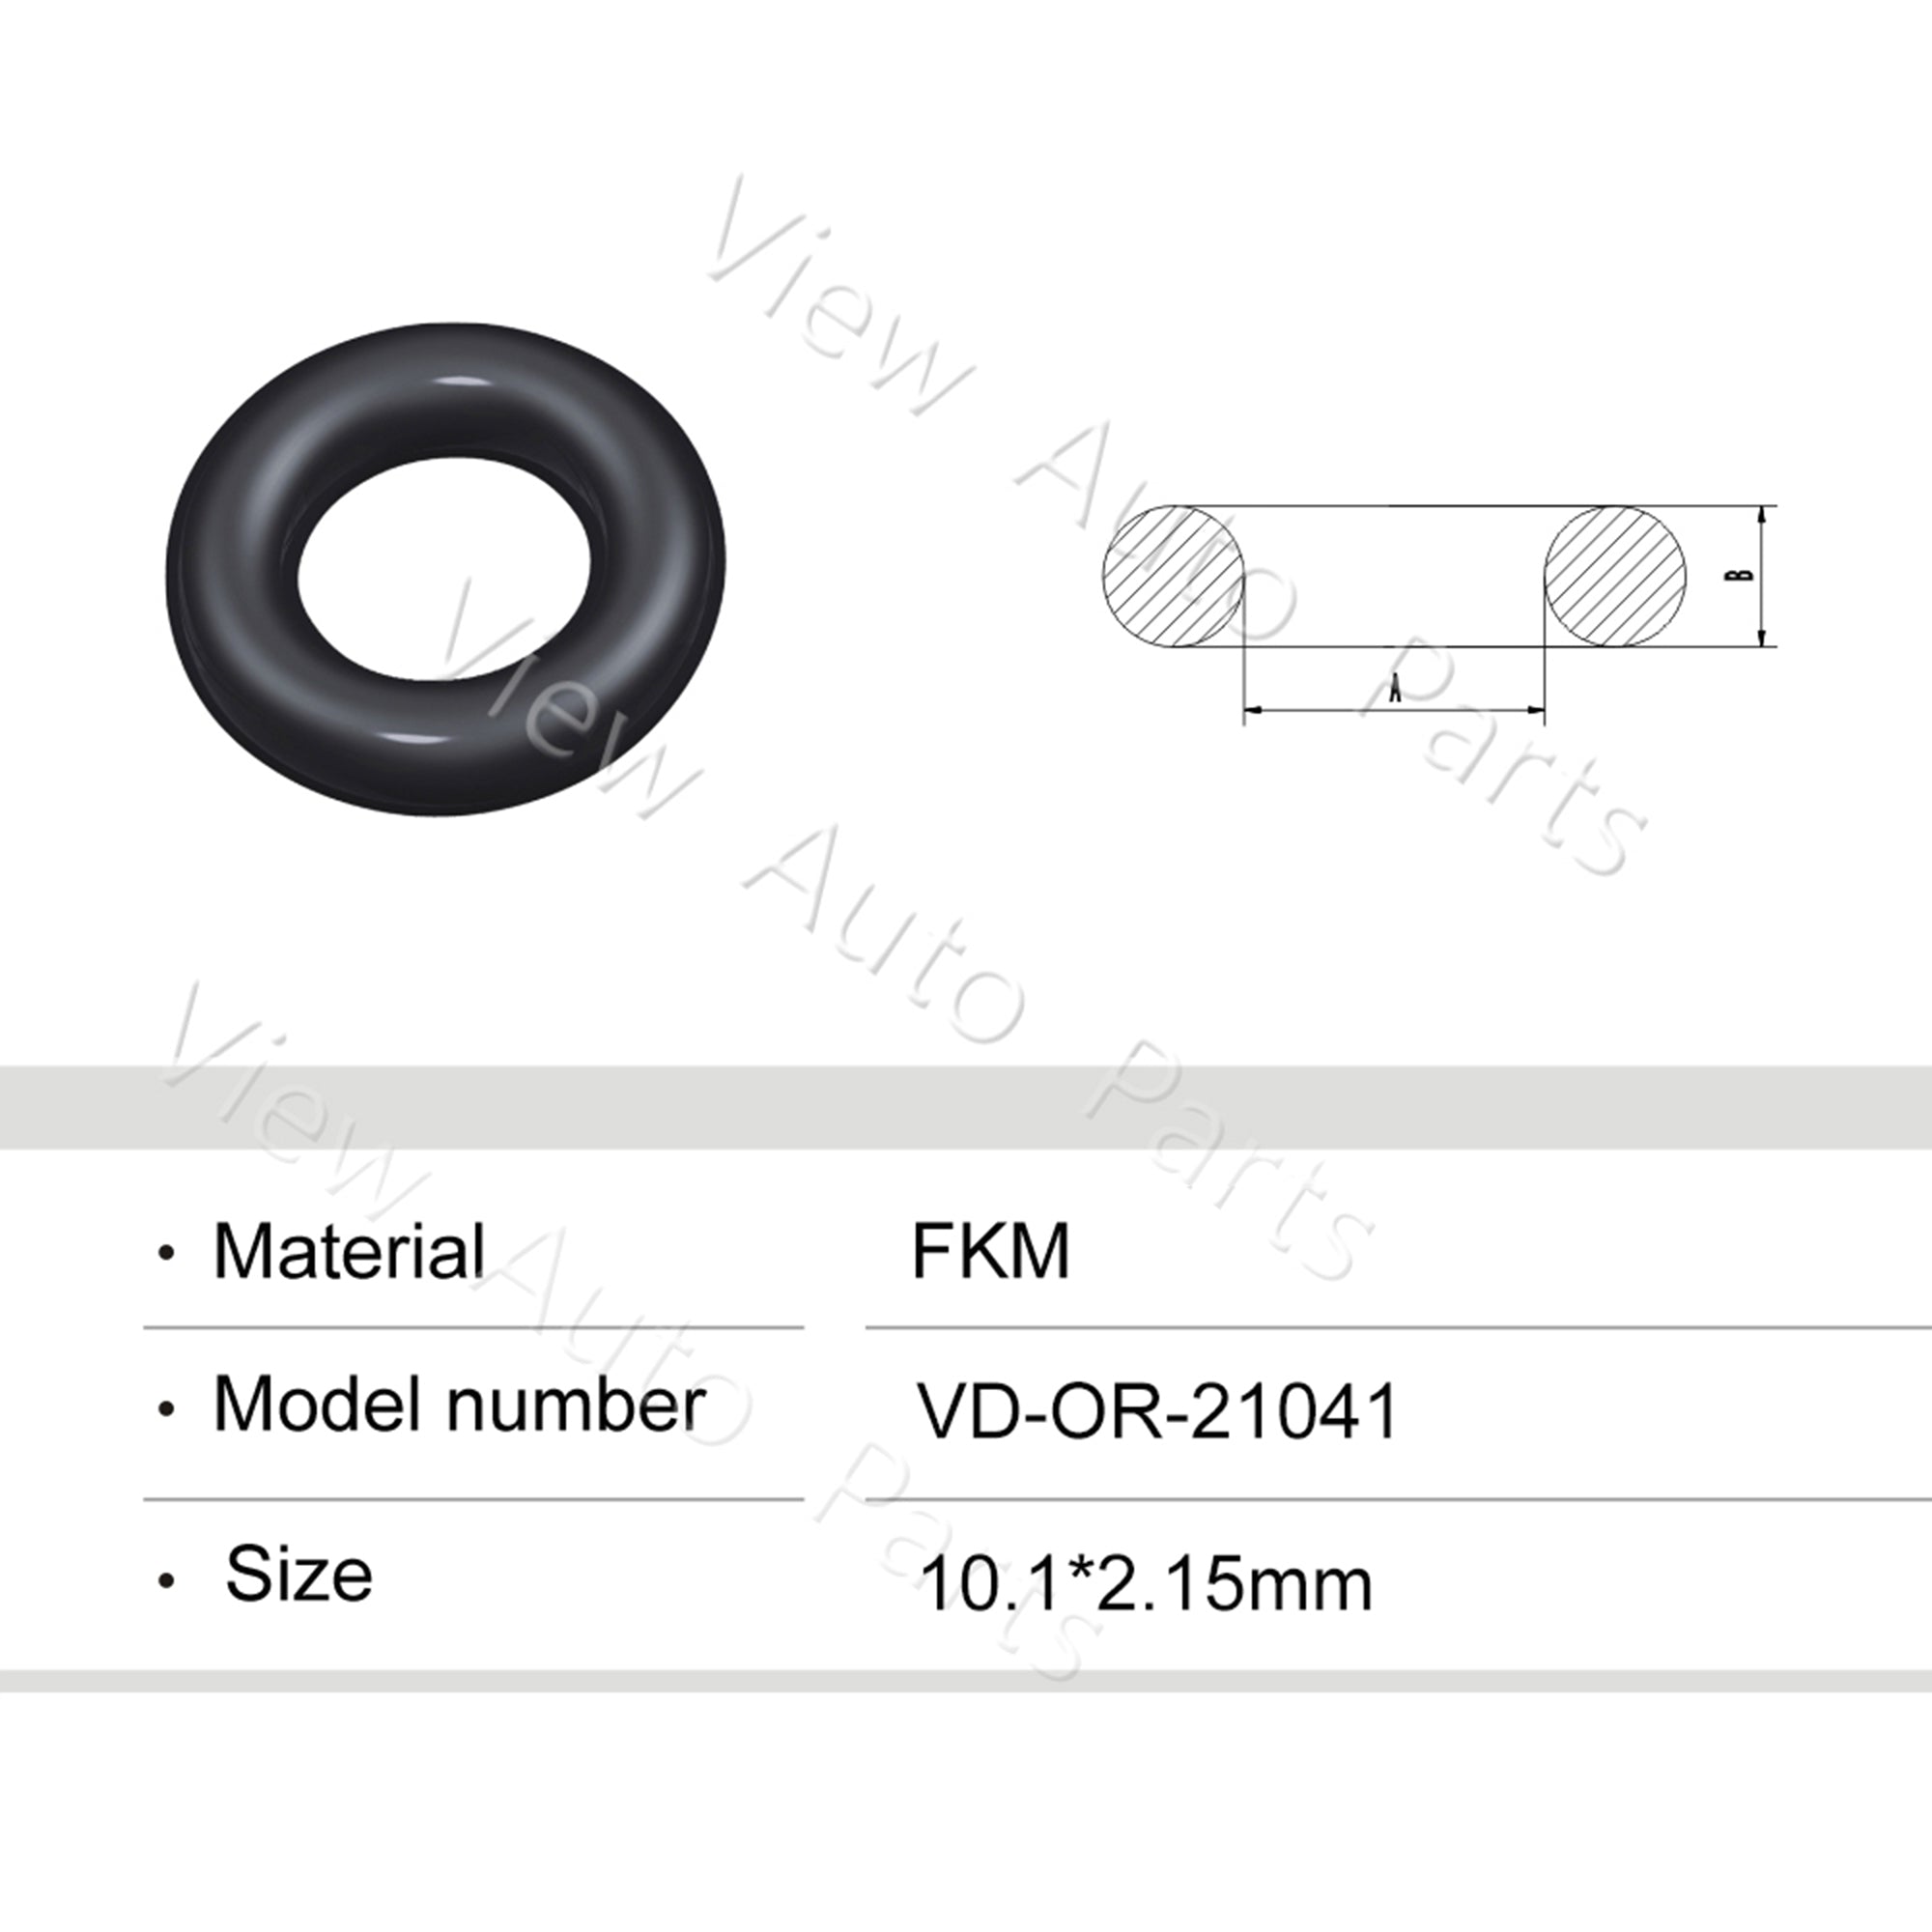 Fuel Injector Rubber Seal Orings for Fuel Injector Repair Kits FKM & Rubber Heat Resistant, Size: 10.1*2.15mm OR-21041